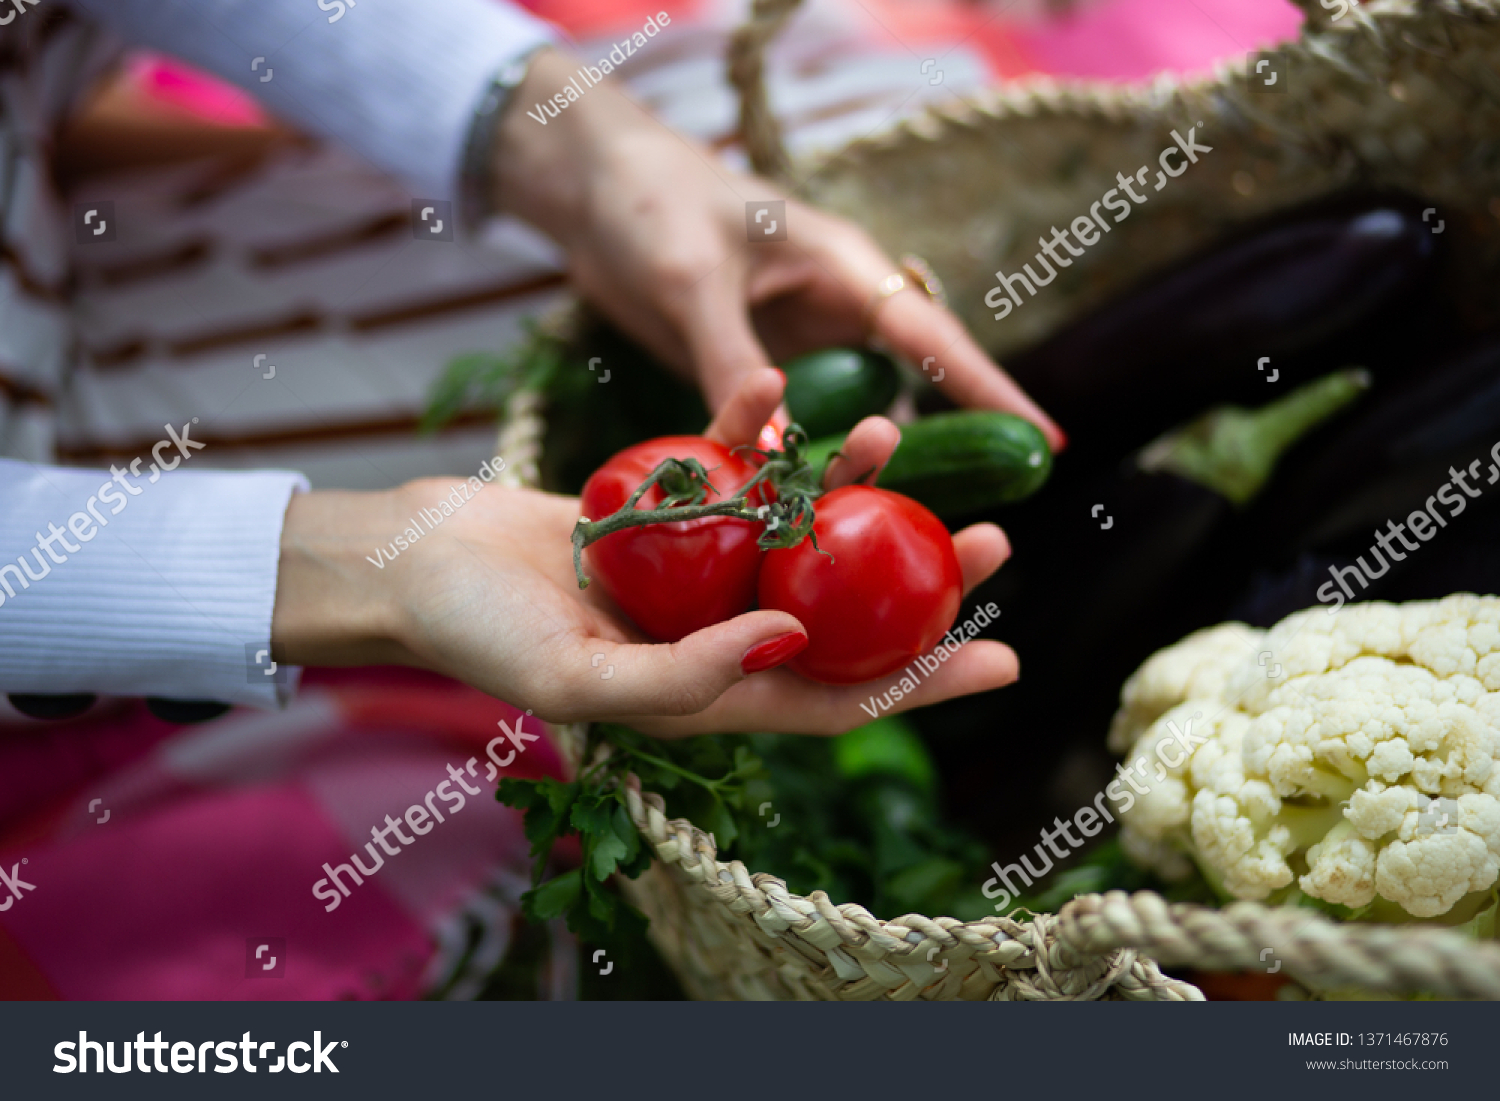 woman hands hold tomatoes and cucumber with basket of Cauliflower and aubergine in the garden #1371467876